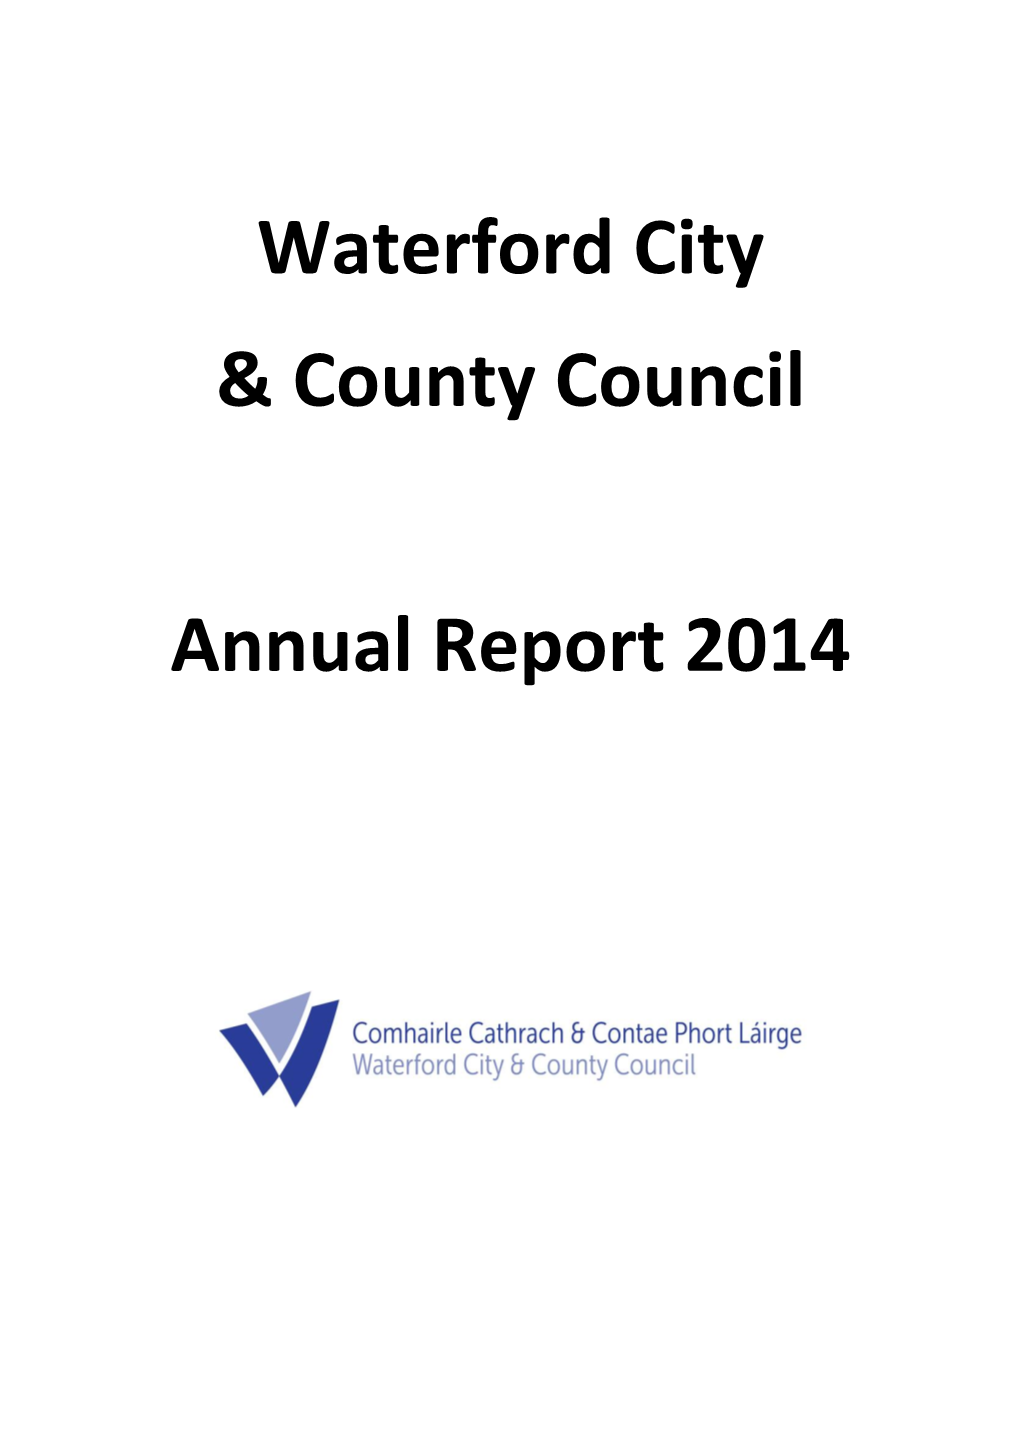 Waterford City & County Council Annual Report 2014